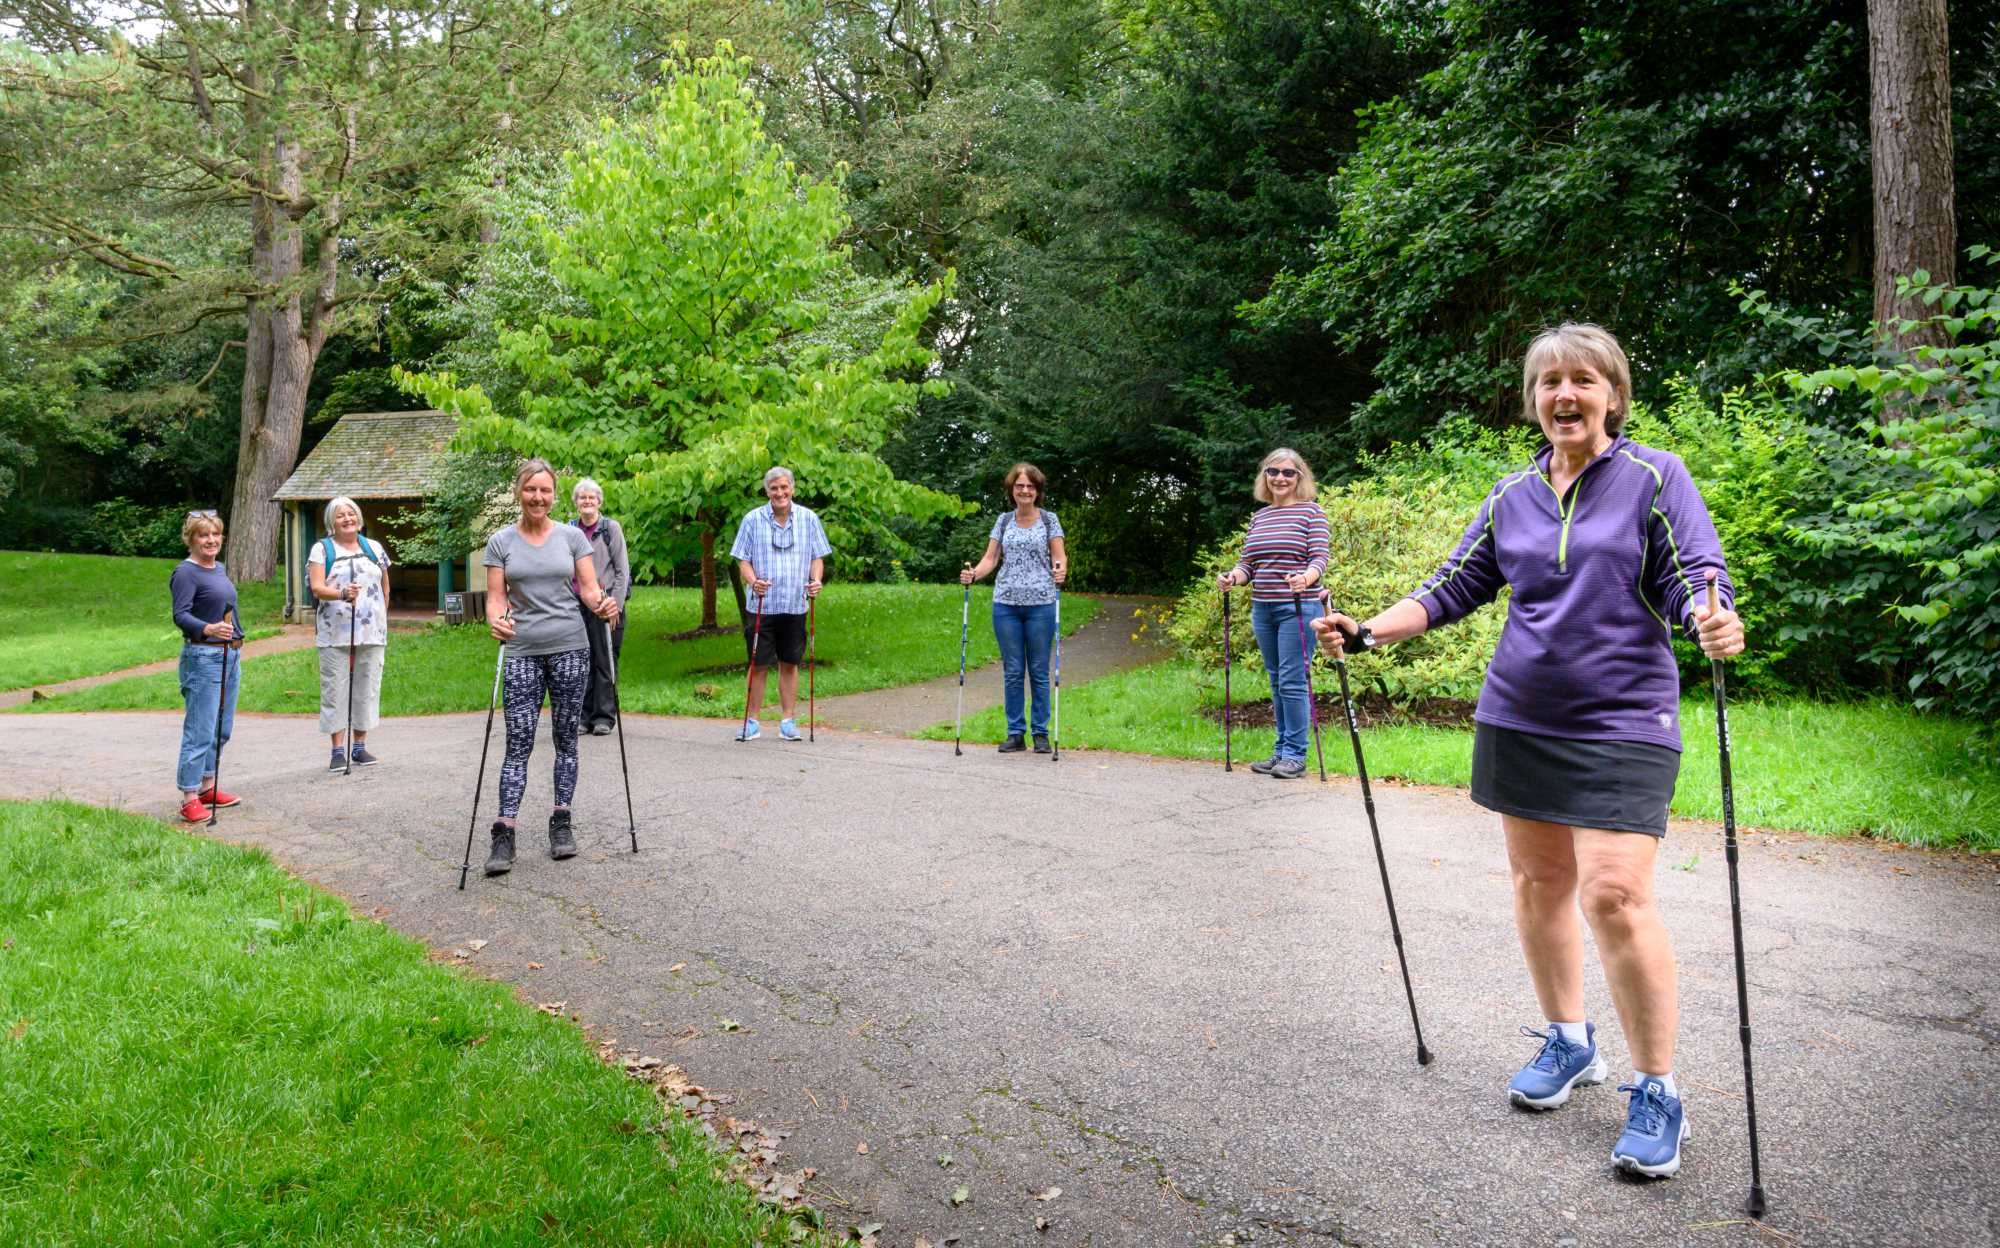 u3a members in a park with walking poles 